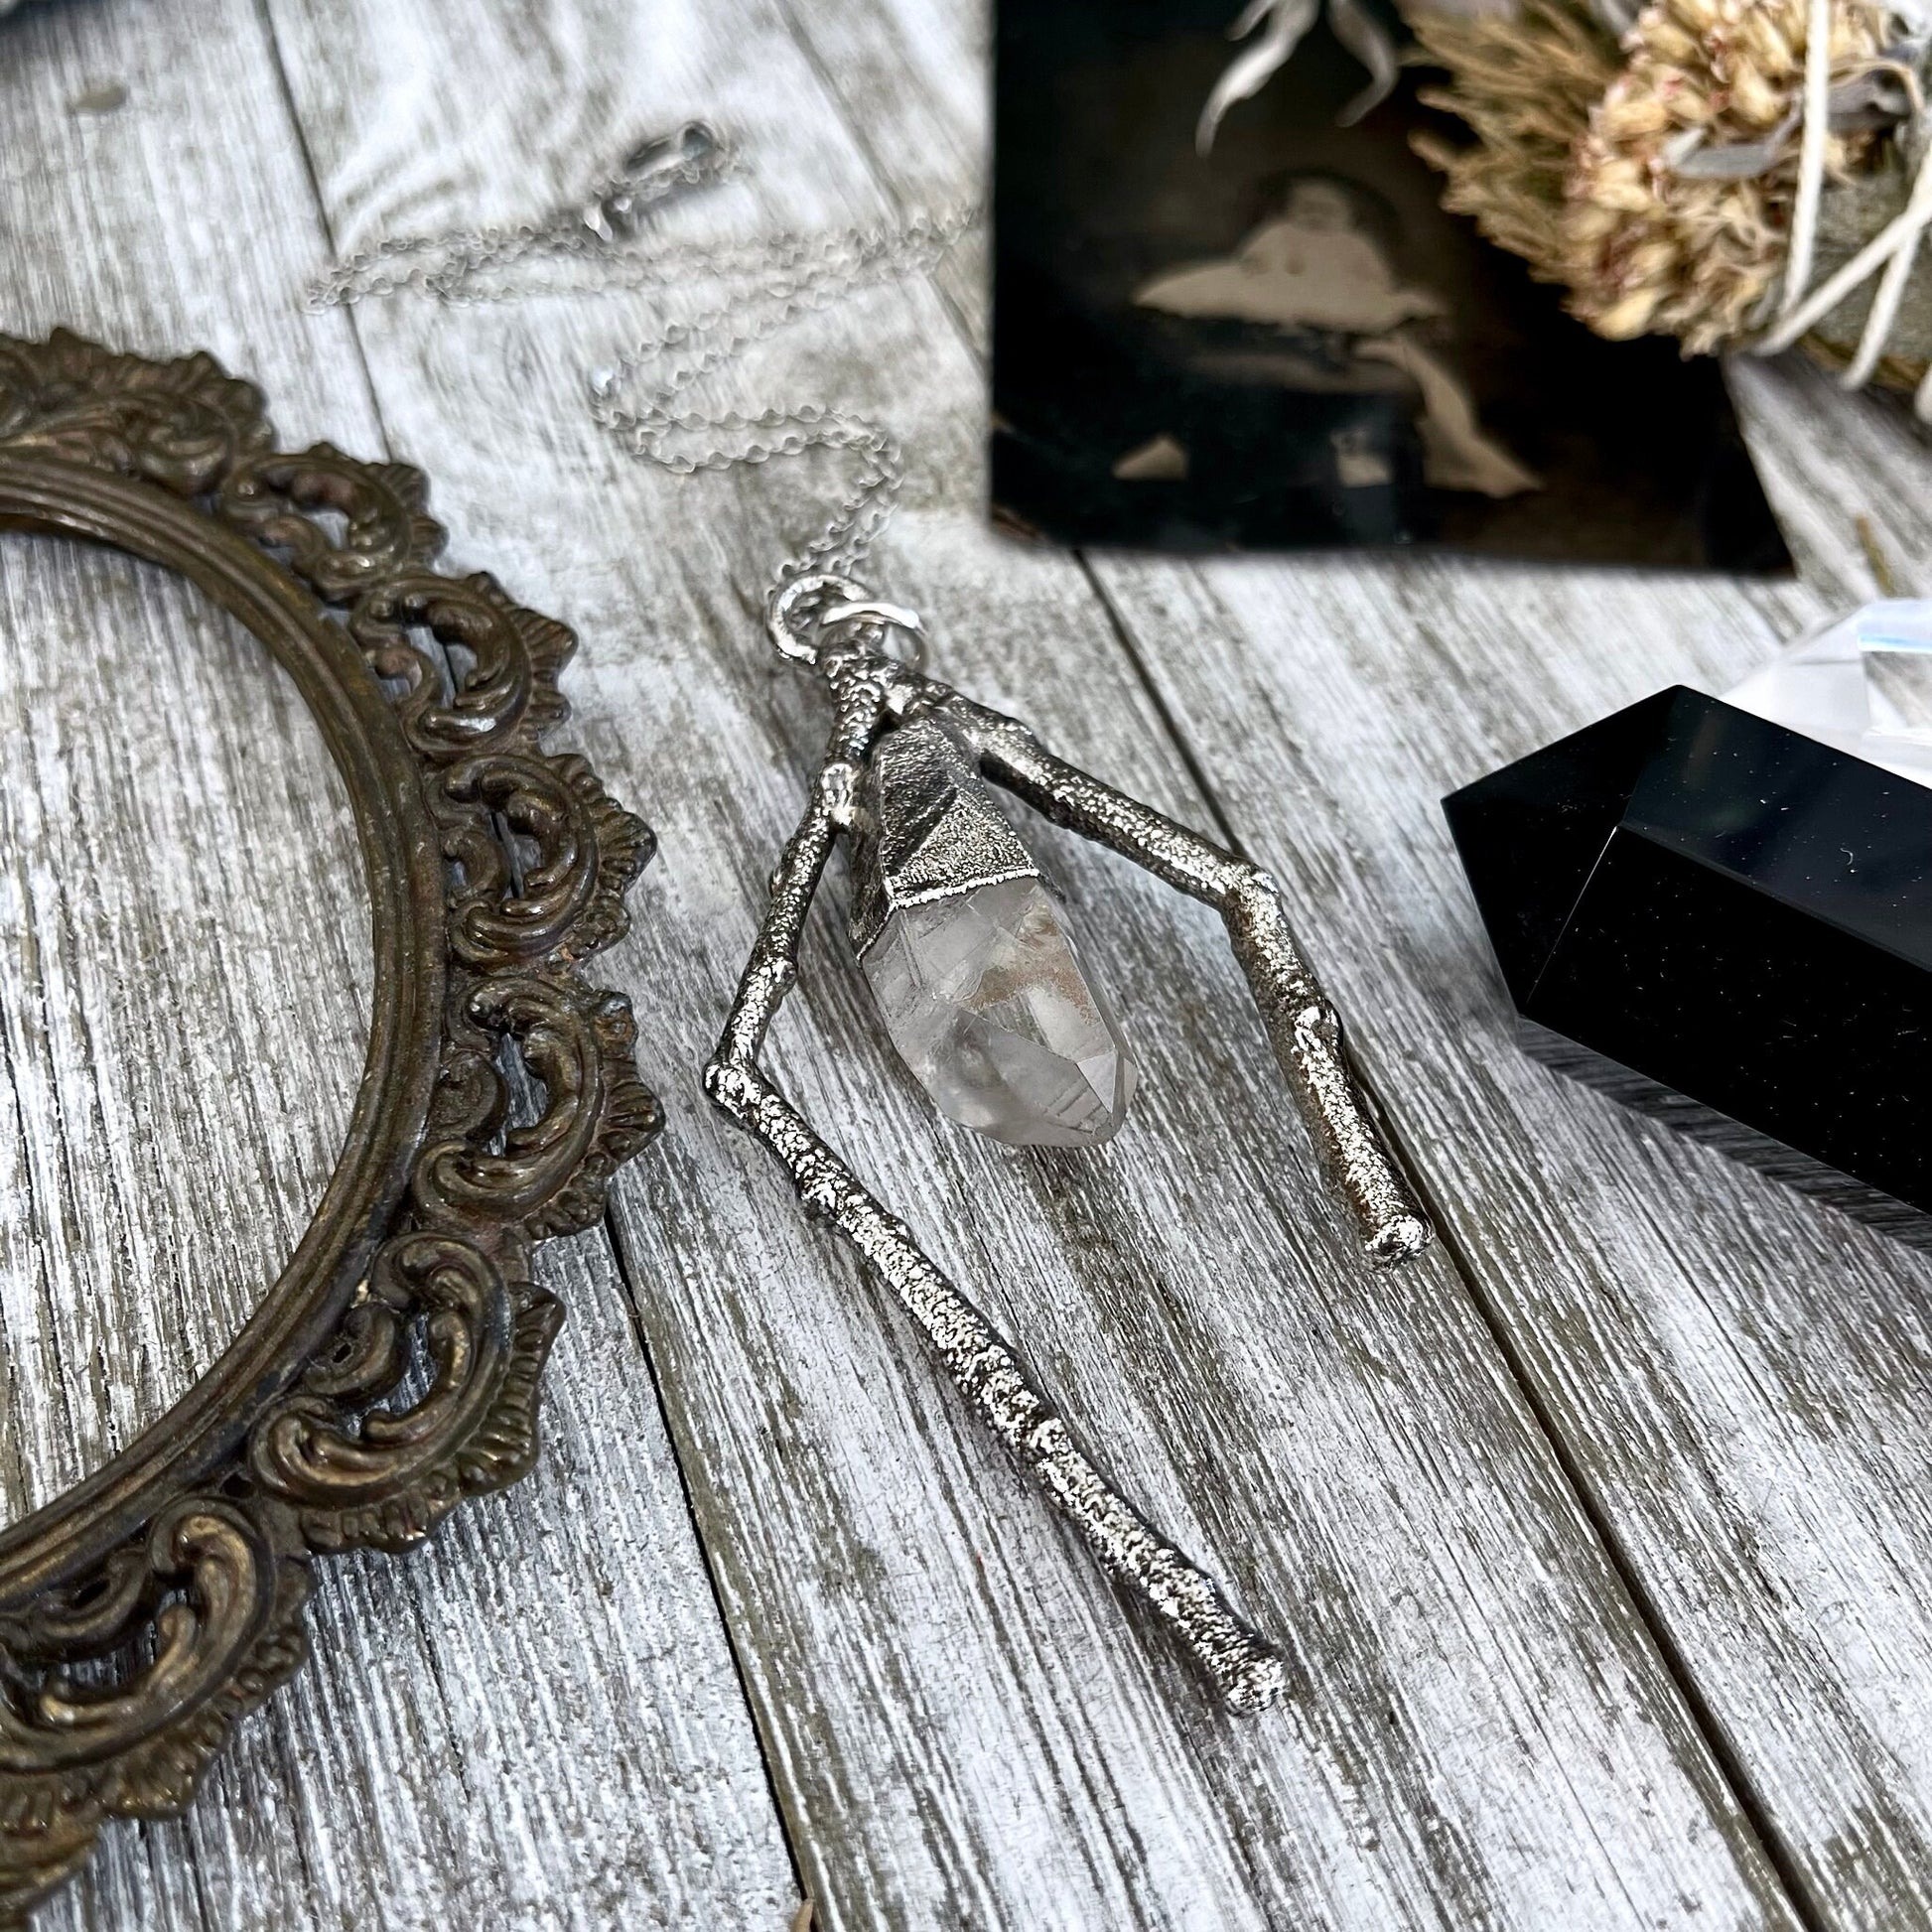 Sticks & Stones Collection- Clear Quartz Necklace in Fine Silver // Big Crystal Necklace. Witchy Jewelry Gothic Pendant / Bohemian Festival